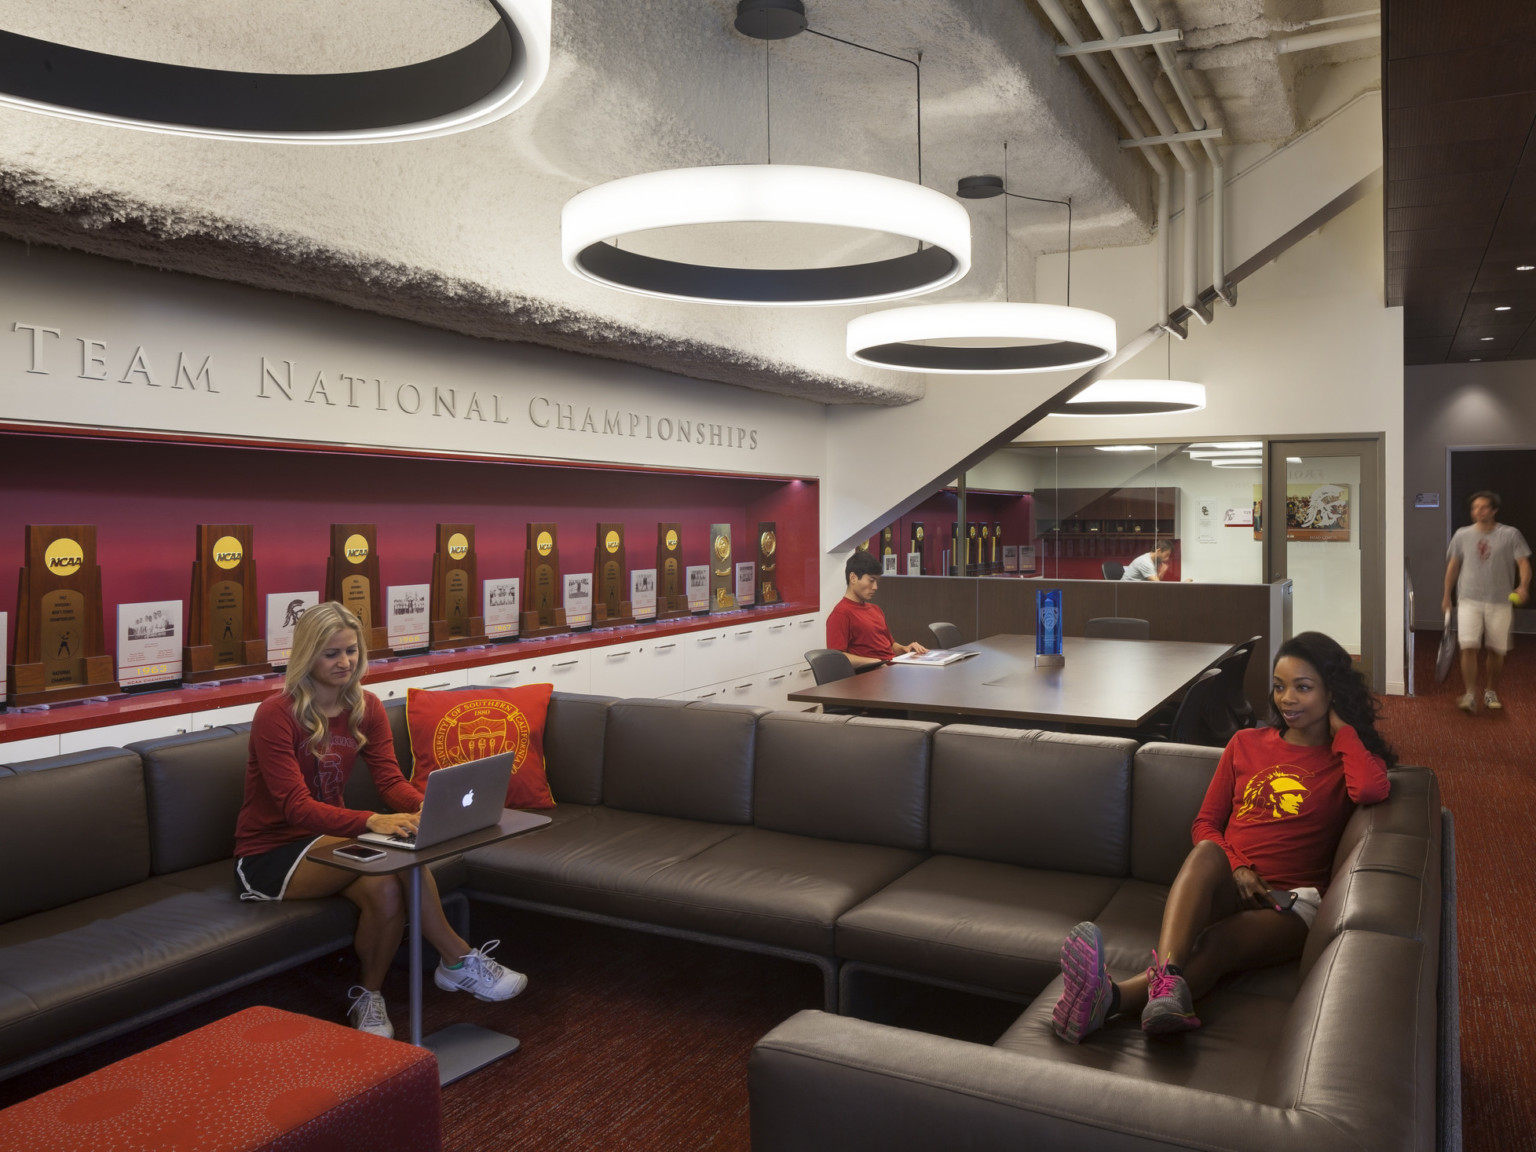 Textural stepped roof with round modern chandeliers over couches and flexible workspaces. Red trophy case to left